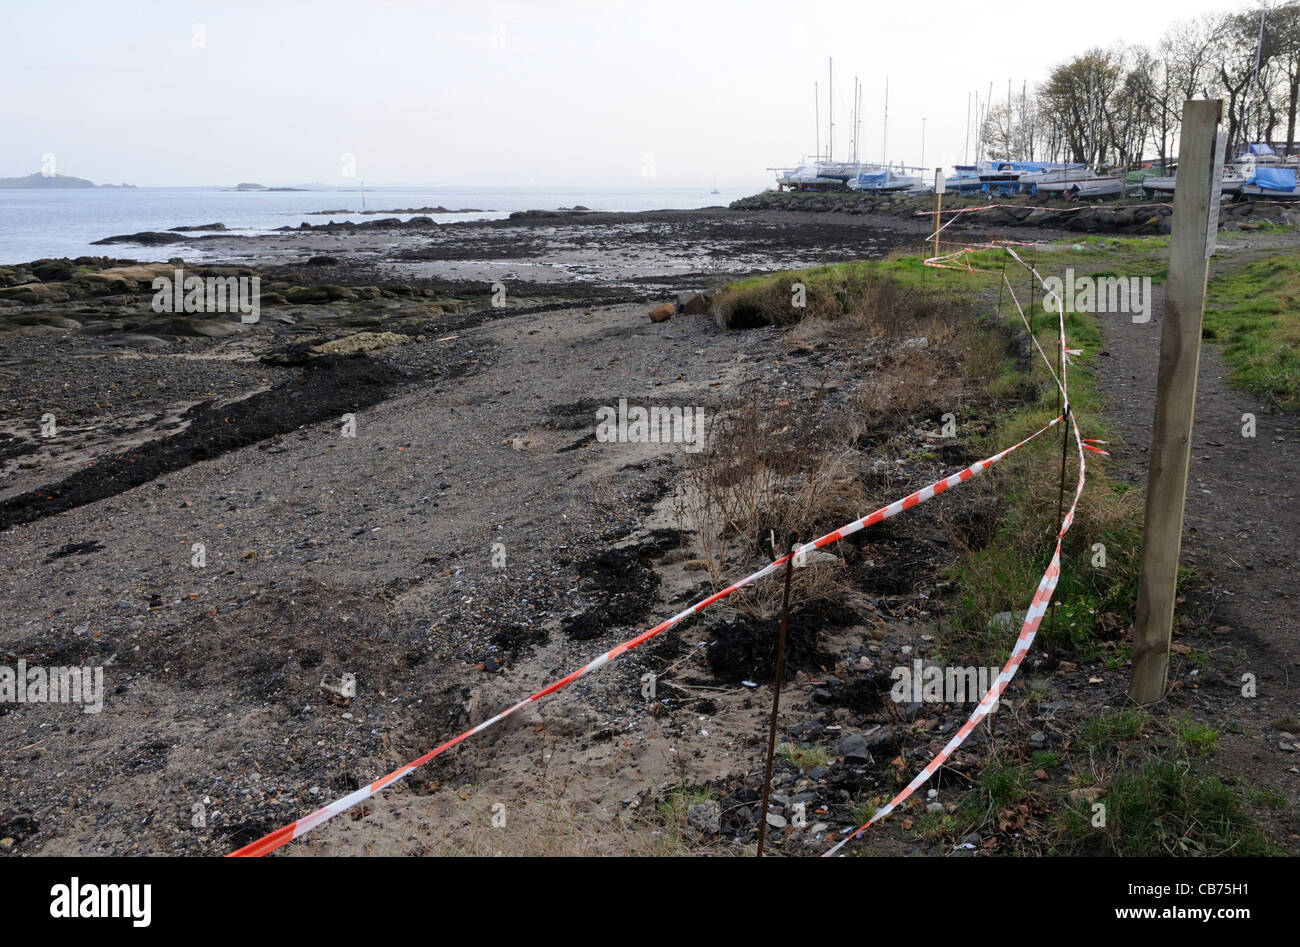 16th November 2011. The beach to the north of Dalgety Bay Sailing club has been cordoned off due to radioactive contamination. Stock Photo